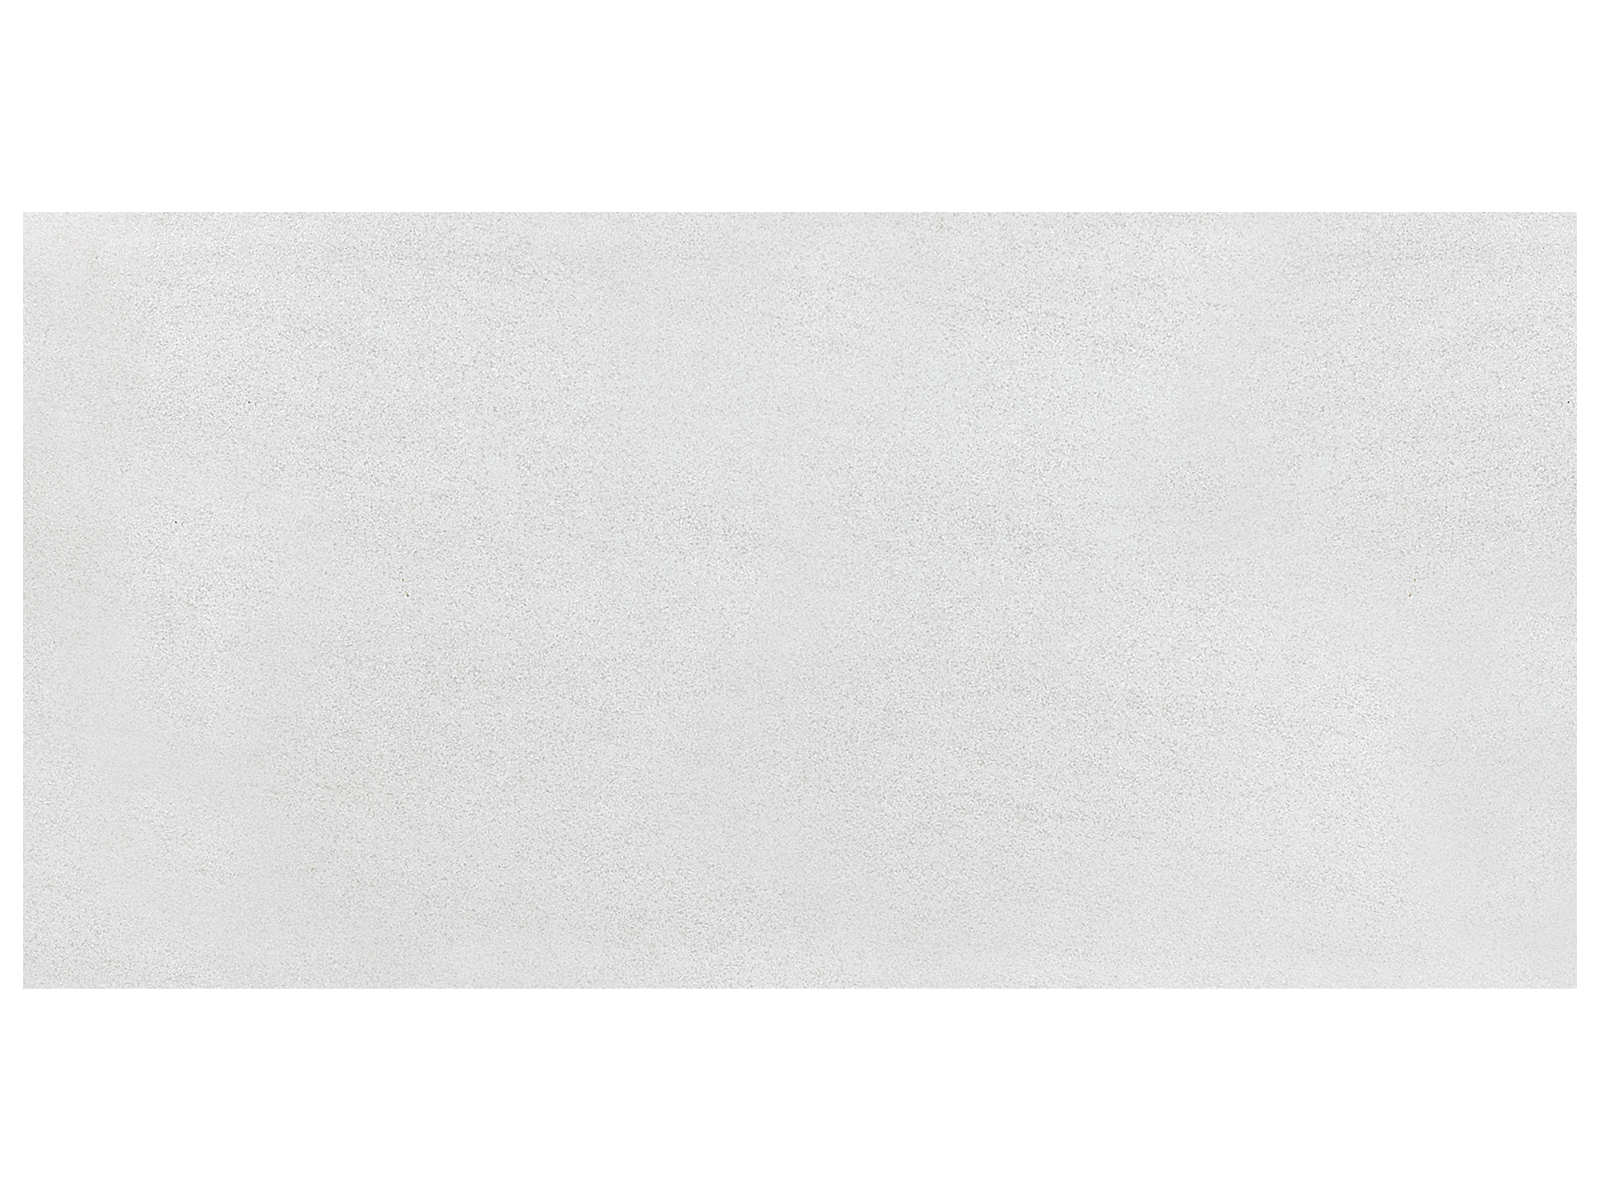 Notion Ice Matte Rectified Tile 12 x 24 in | 30 x 60 cm – Archimat